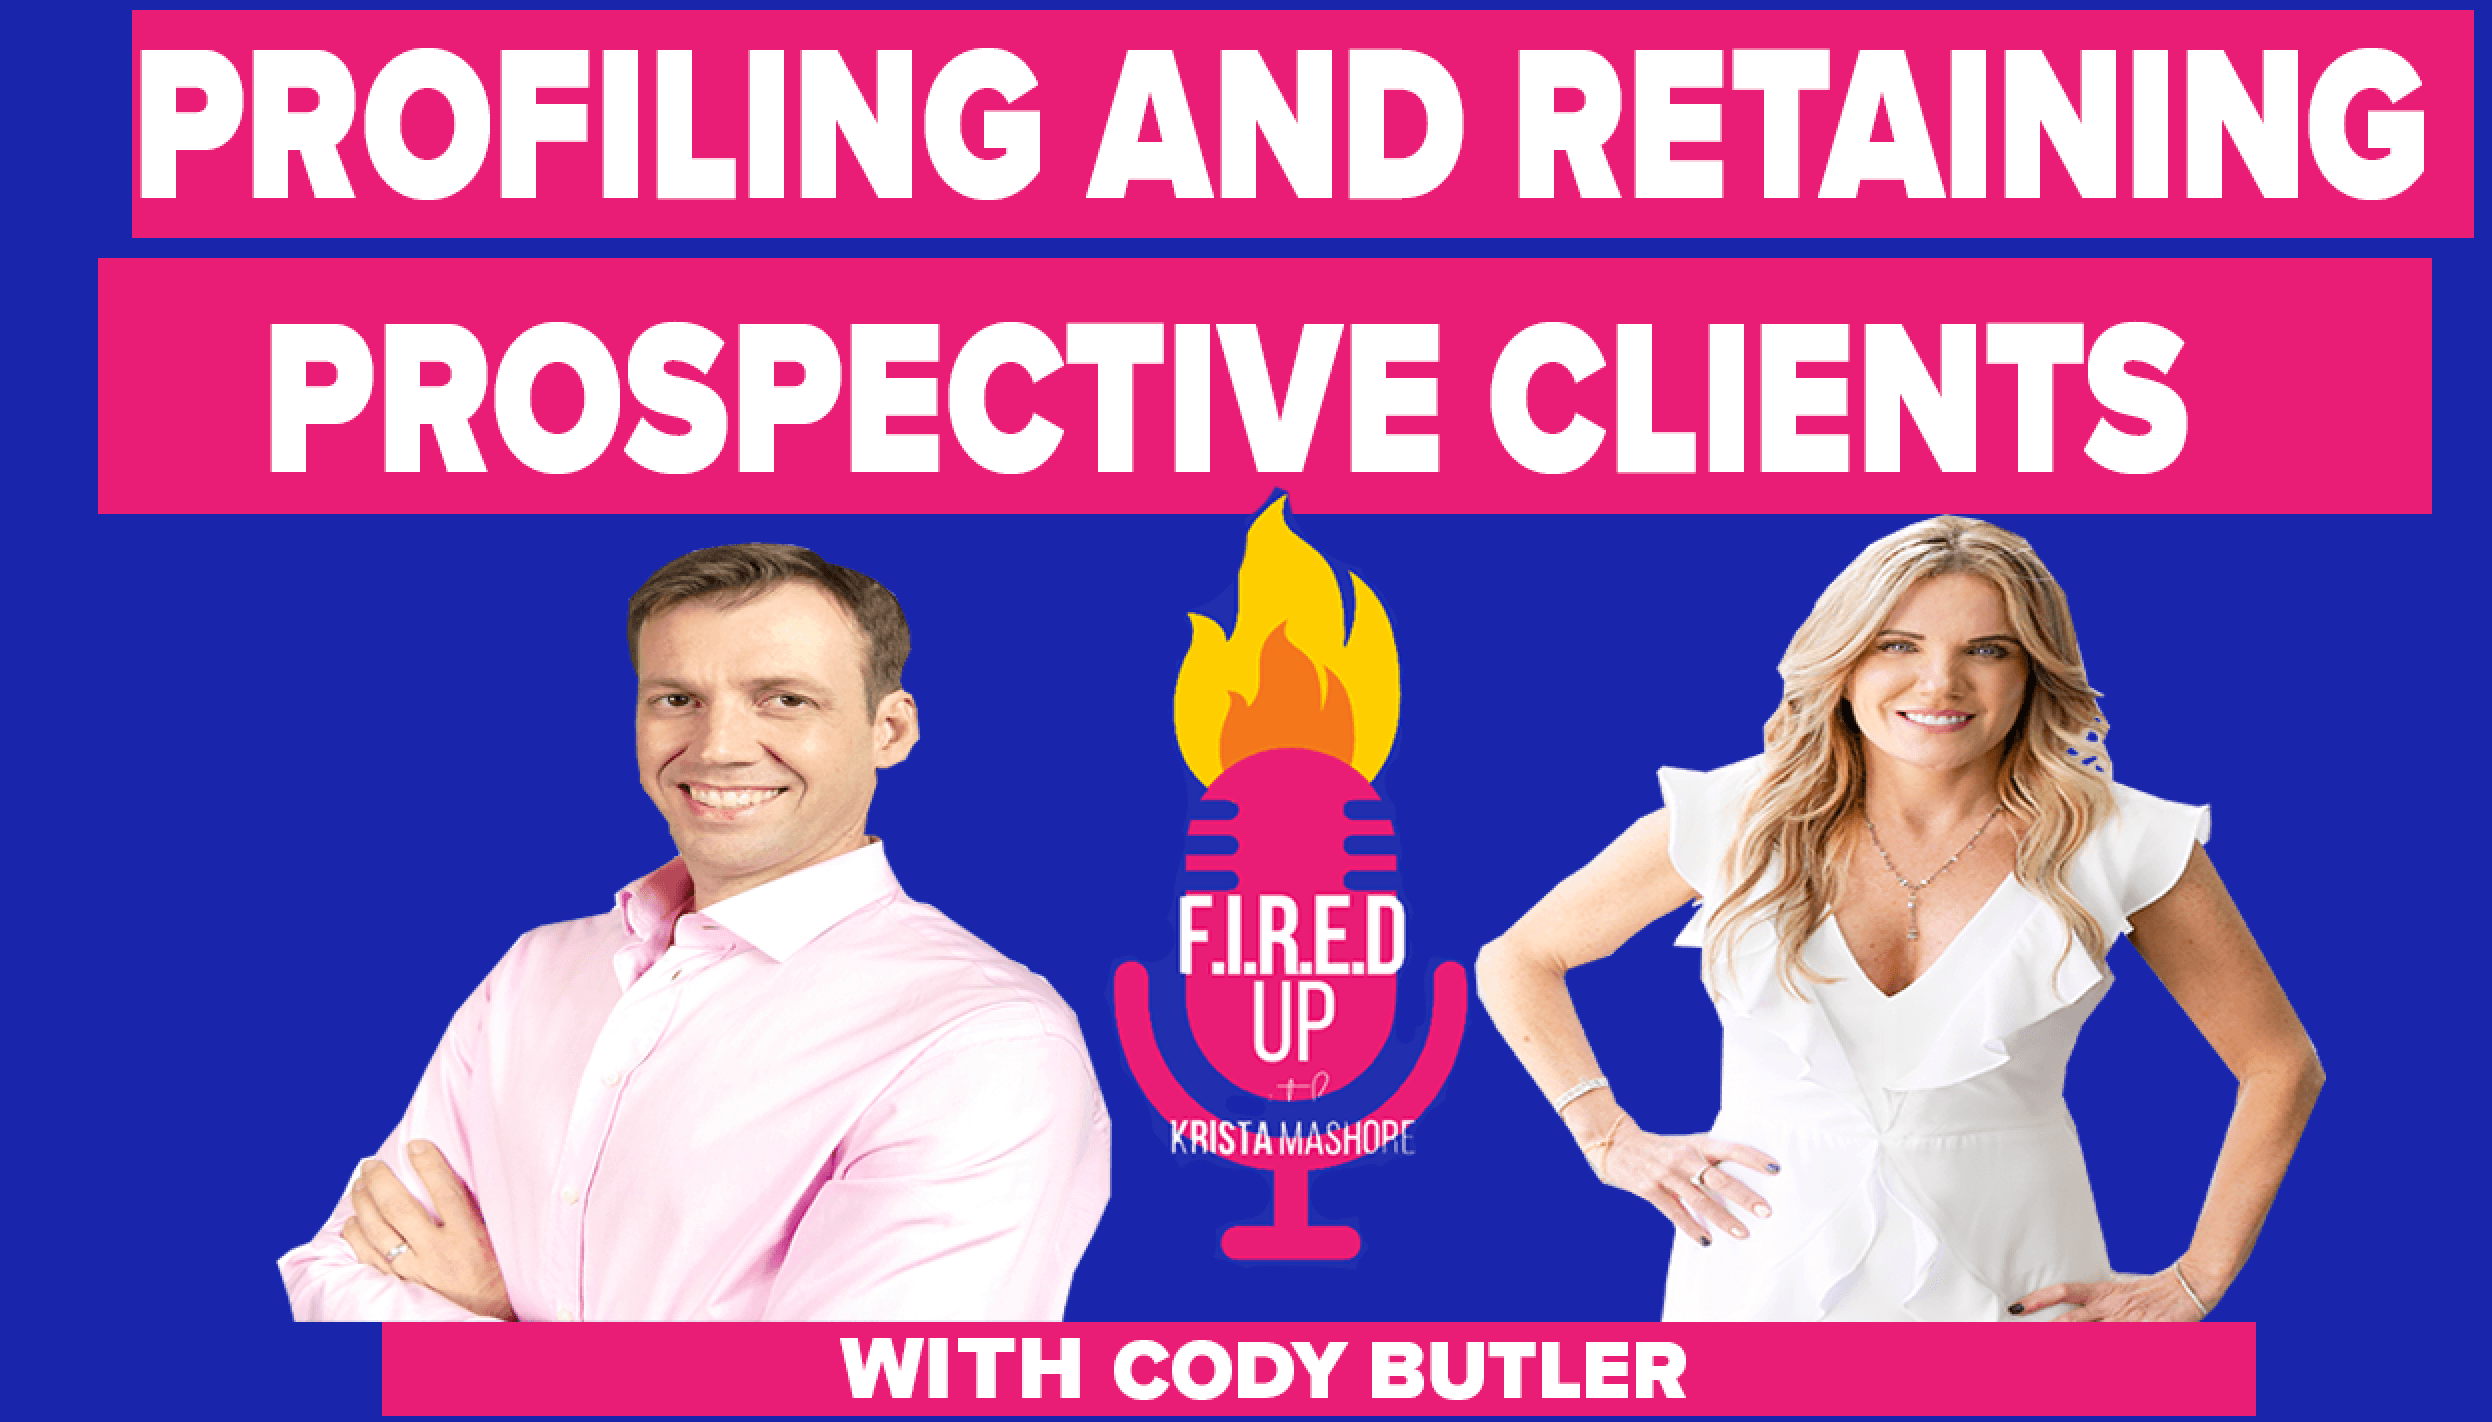 Profiling and Retaining Prospective Clients With Cody Butler